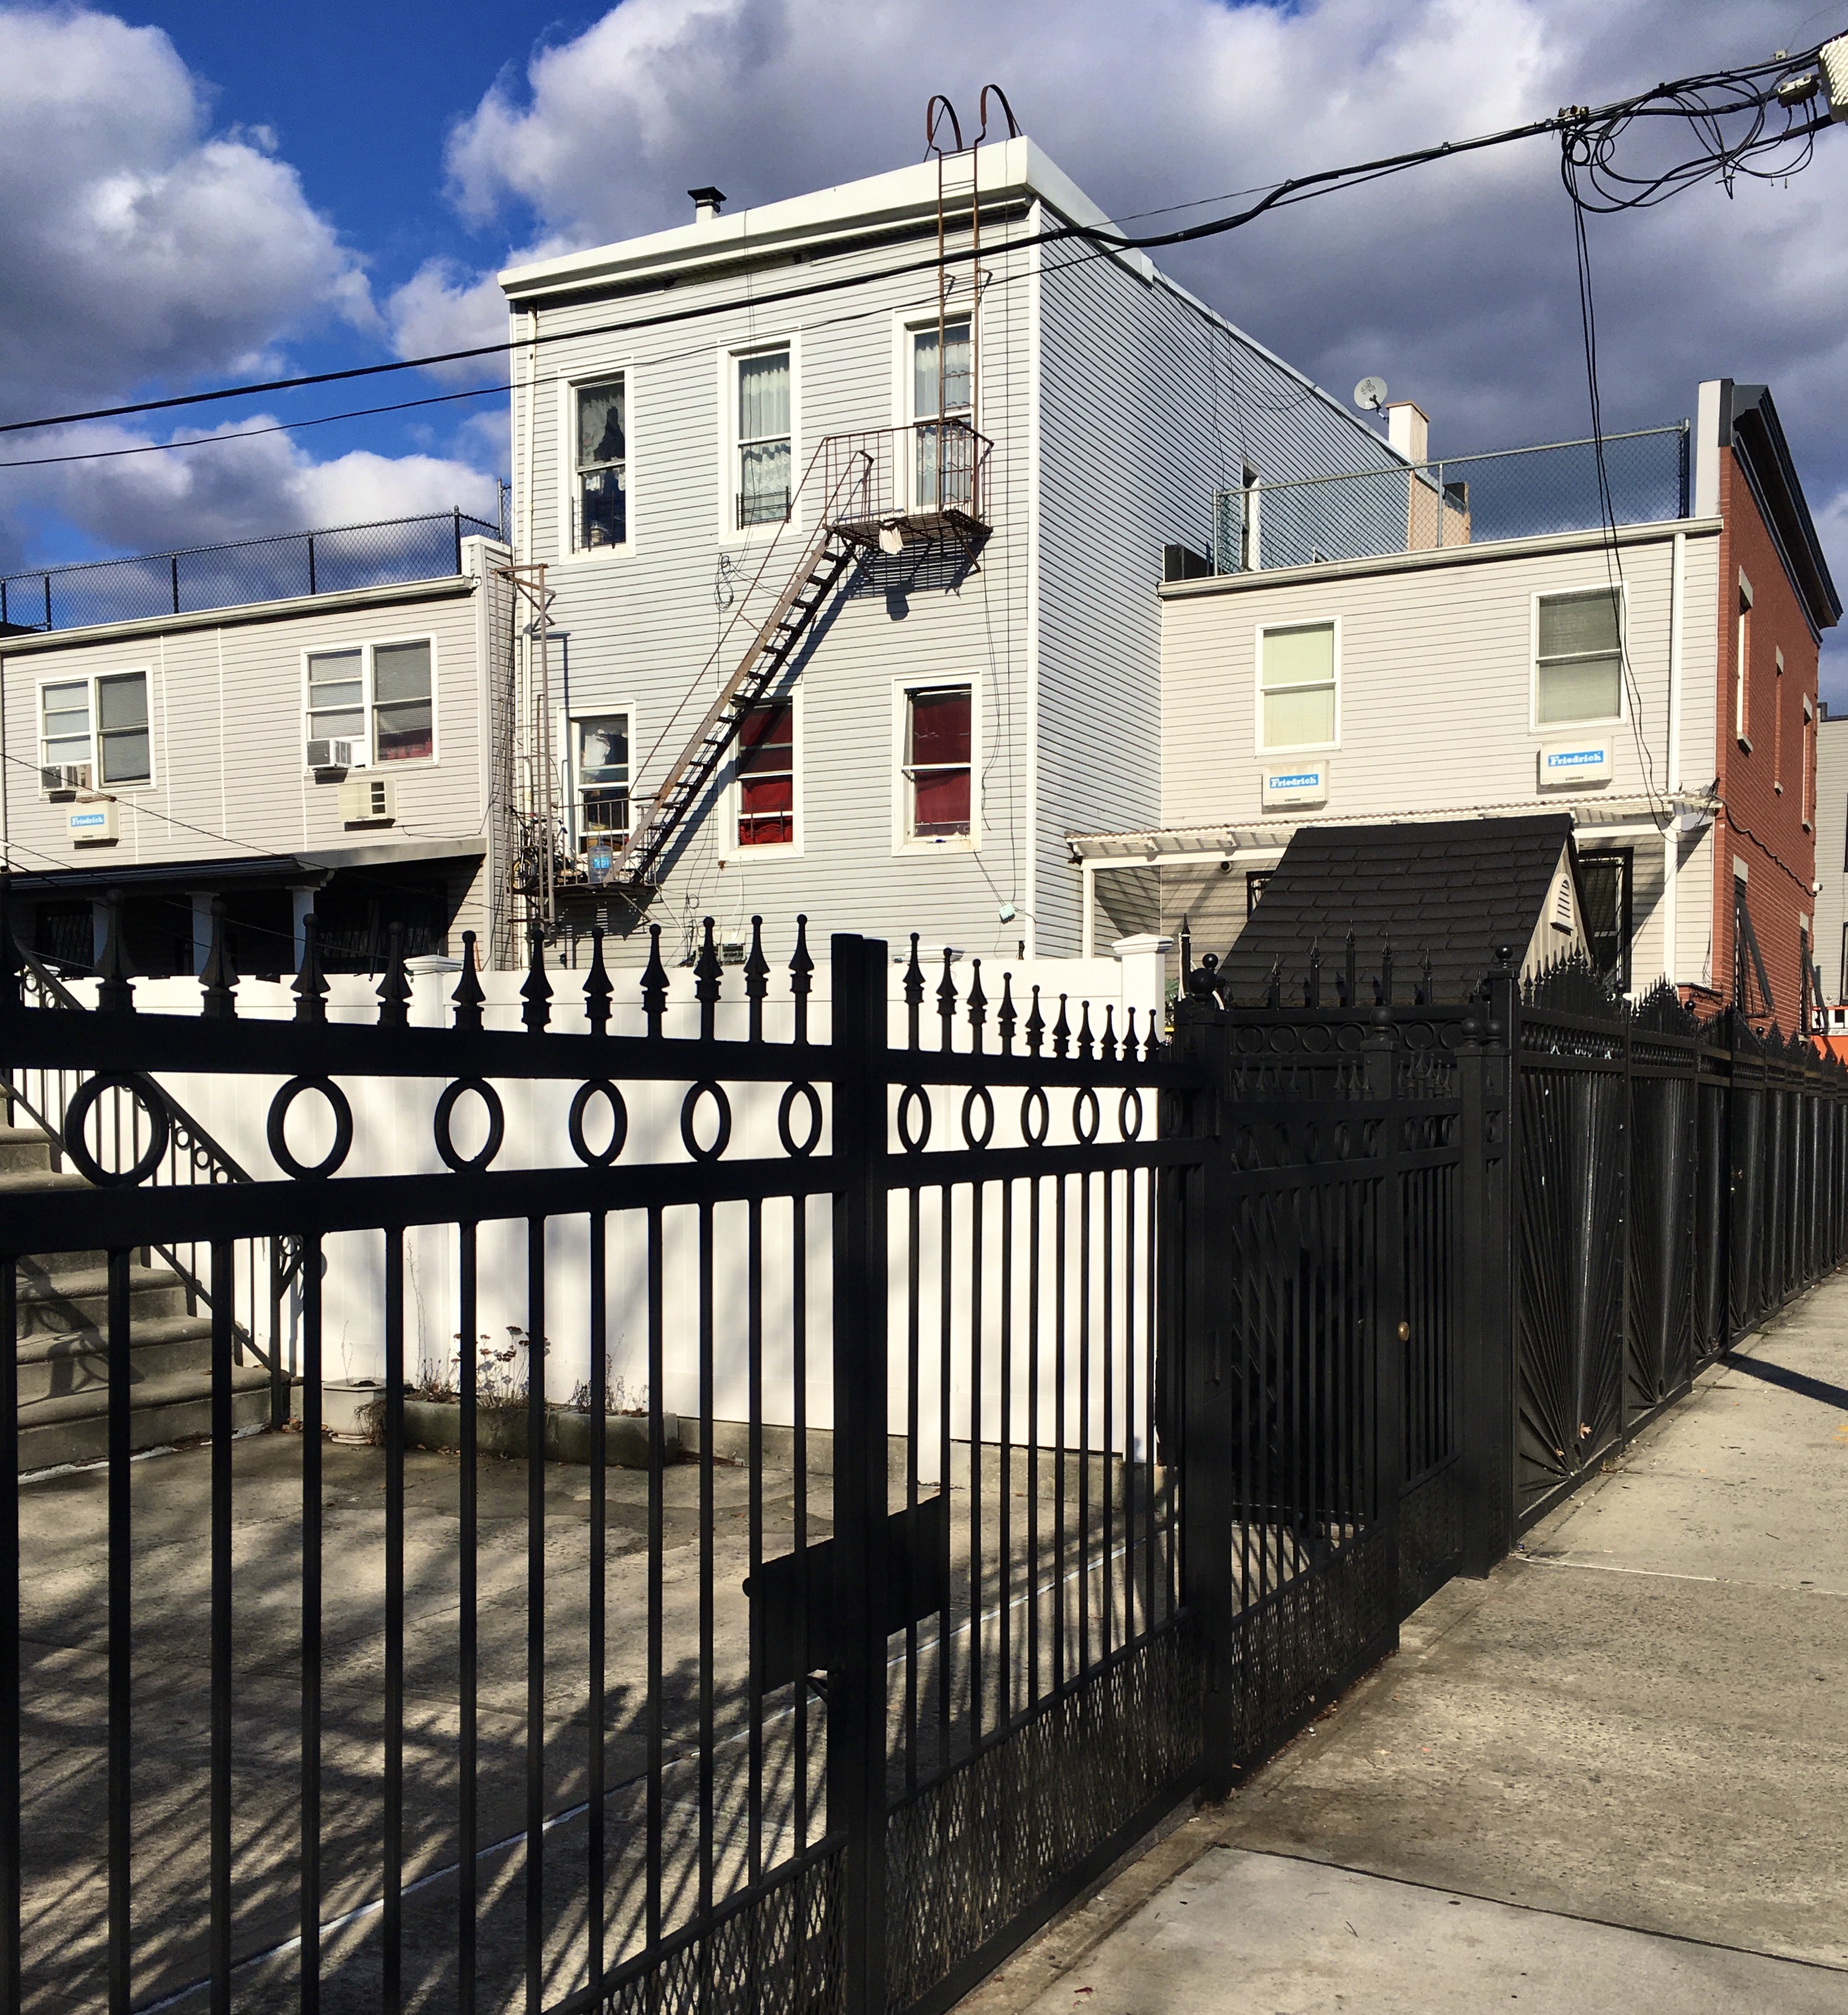 From the Gates Avenue sidewalk, you see the sunlit back facades of rowhouses on Central Avenue. Photo: Lore Croghan/Brooklyn Eagle